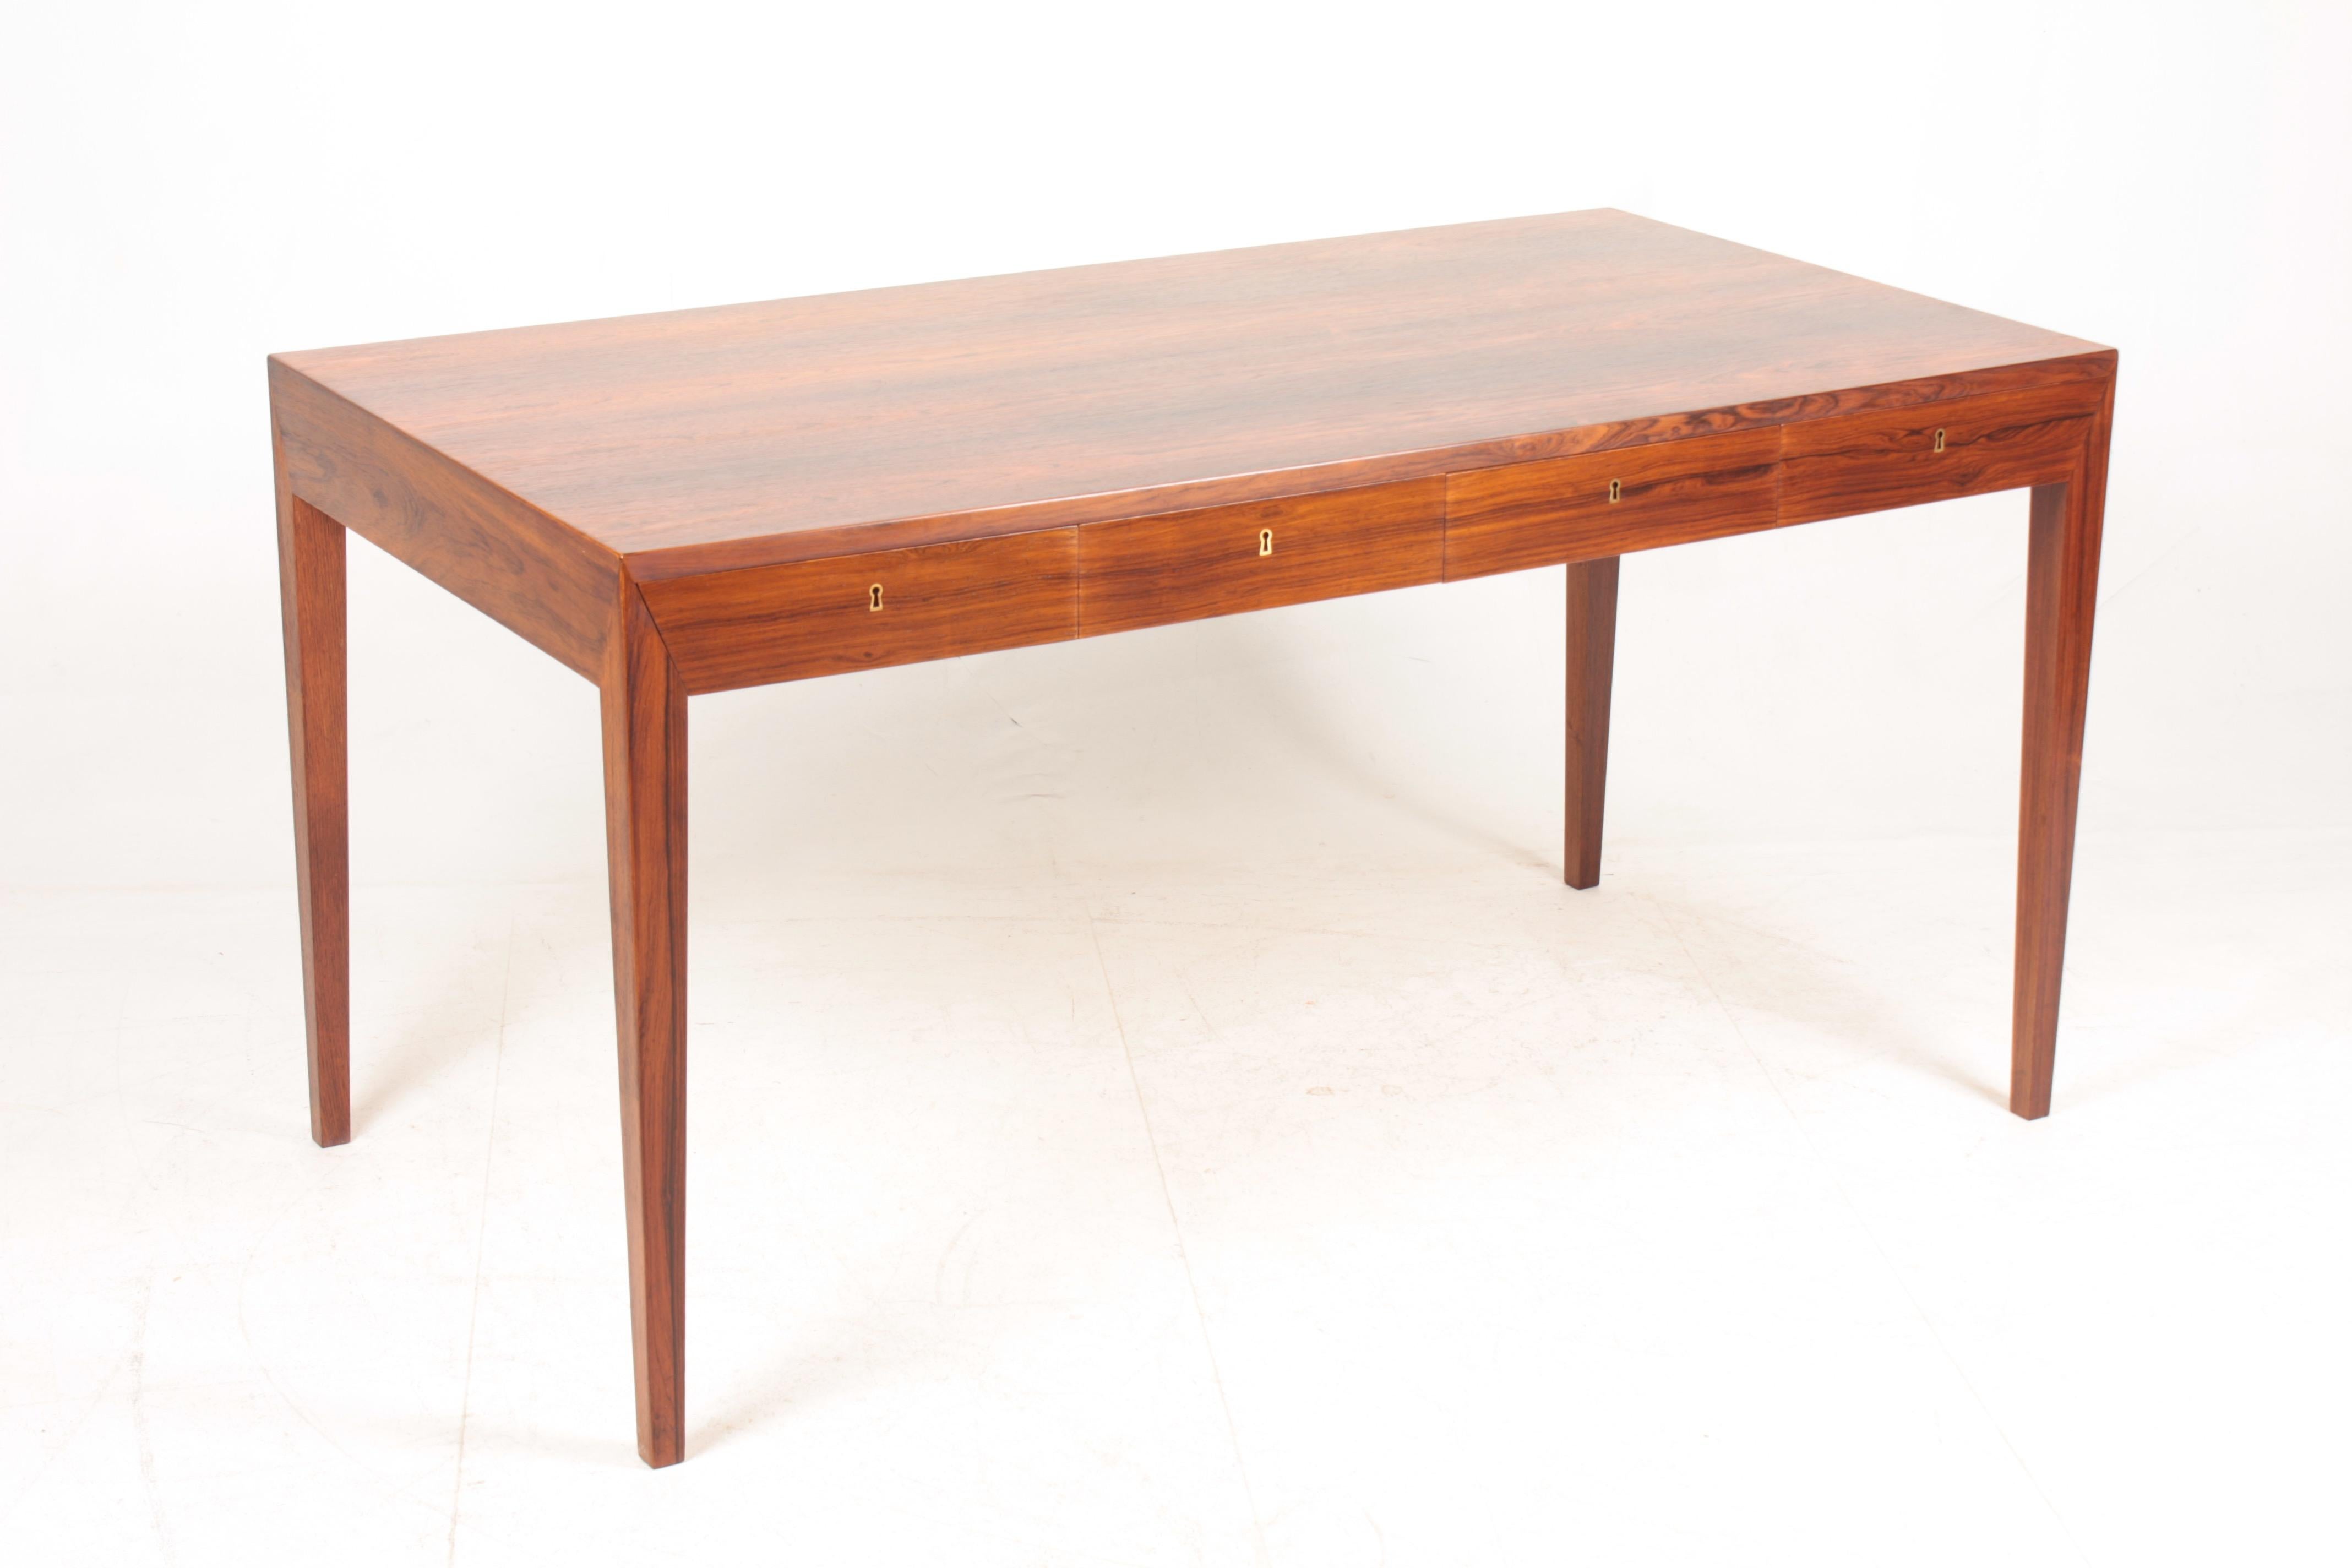 Elegant freestanding Danish design rosewood desk with four drawers designed by Severin Hansen Jr. for Haslev Furniture in the late 1950s. Made in Denmark, great original condition.